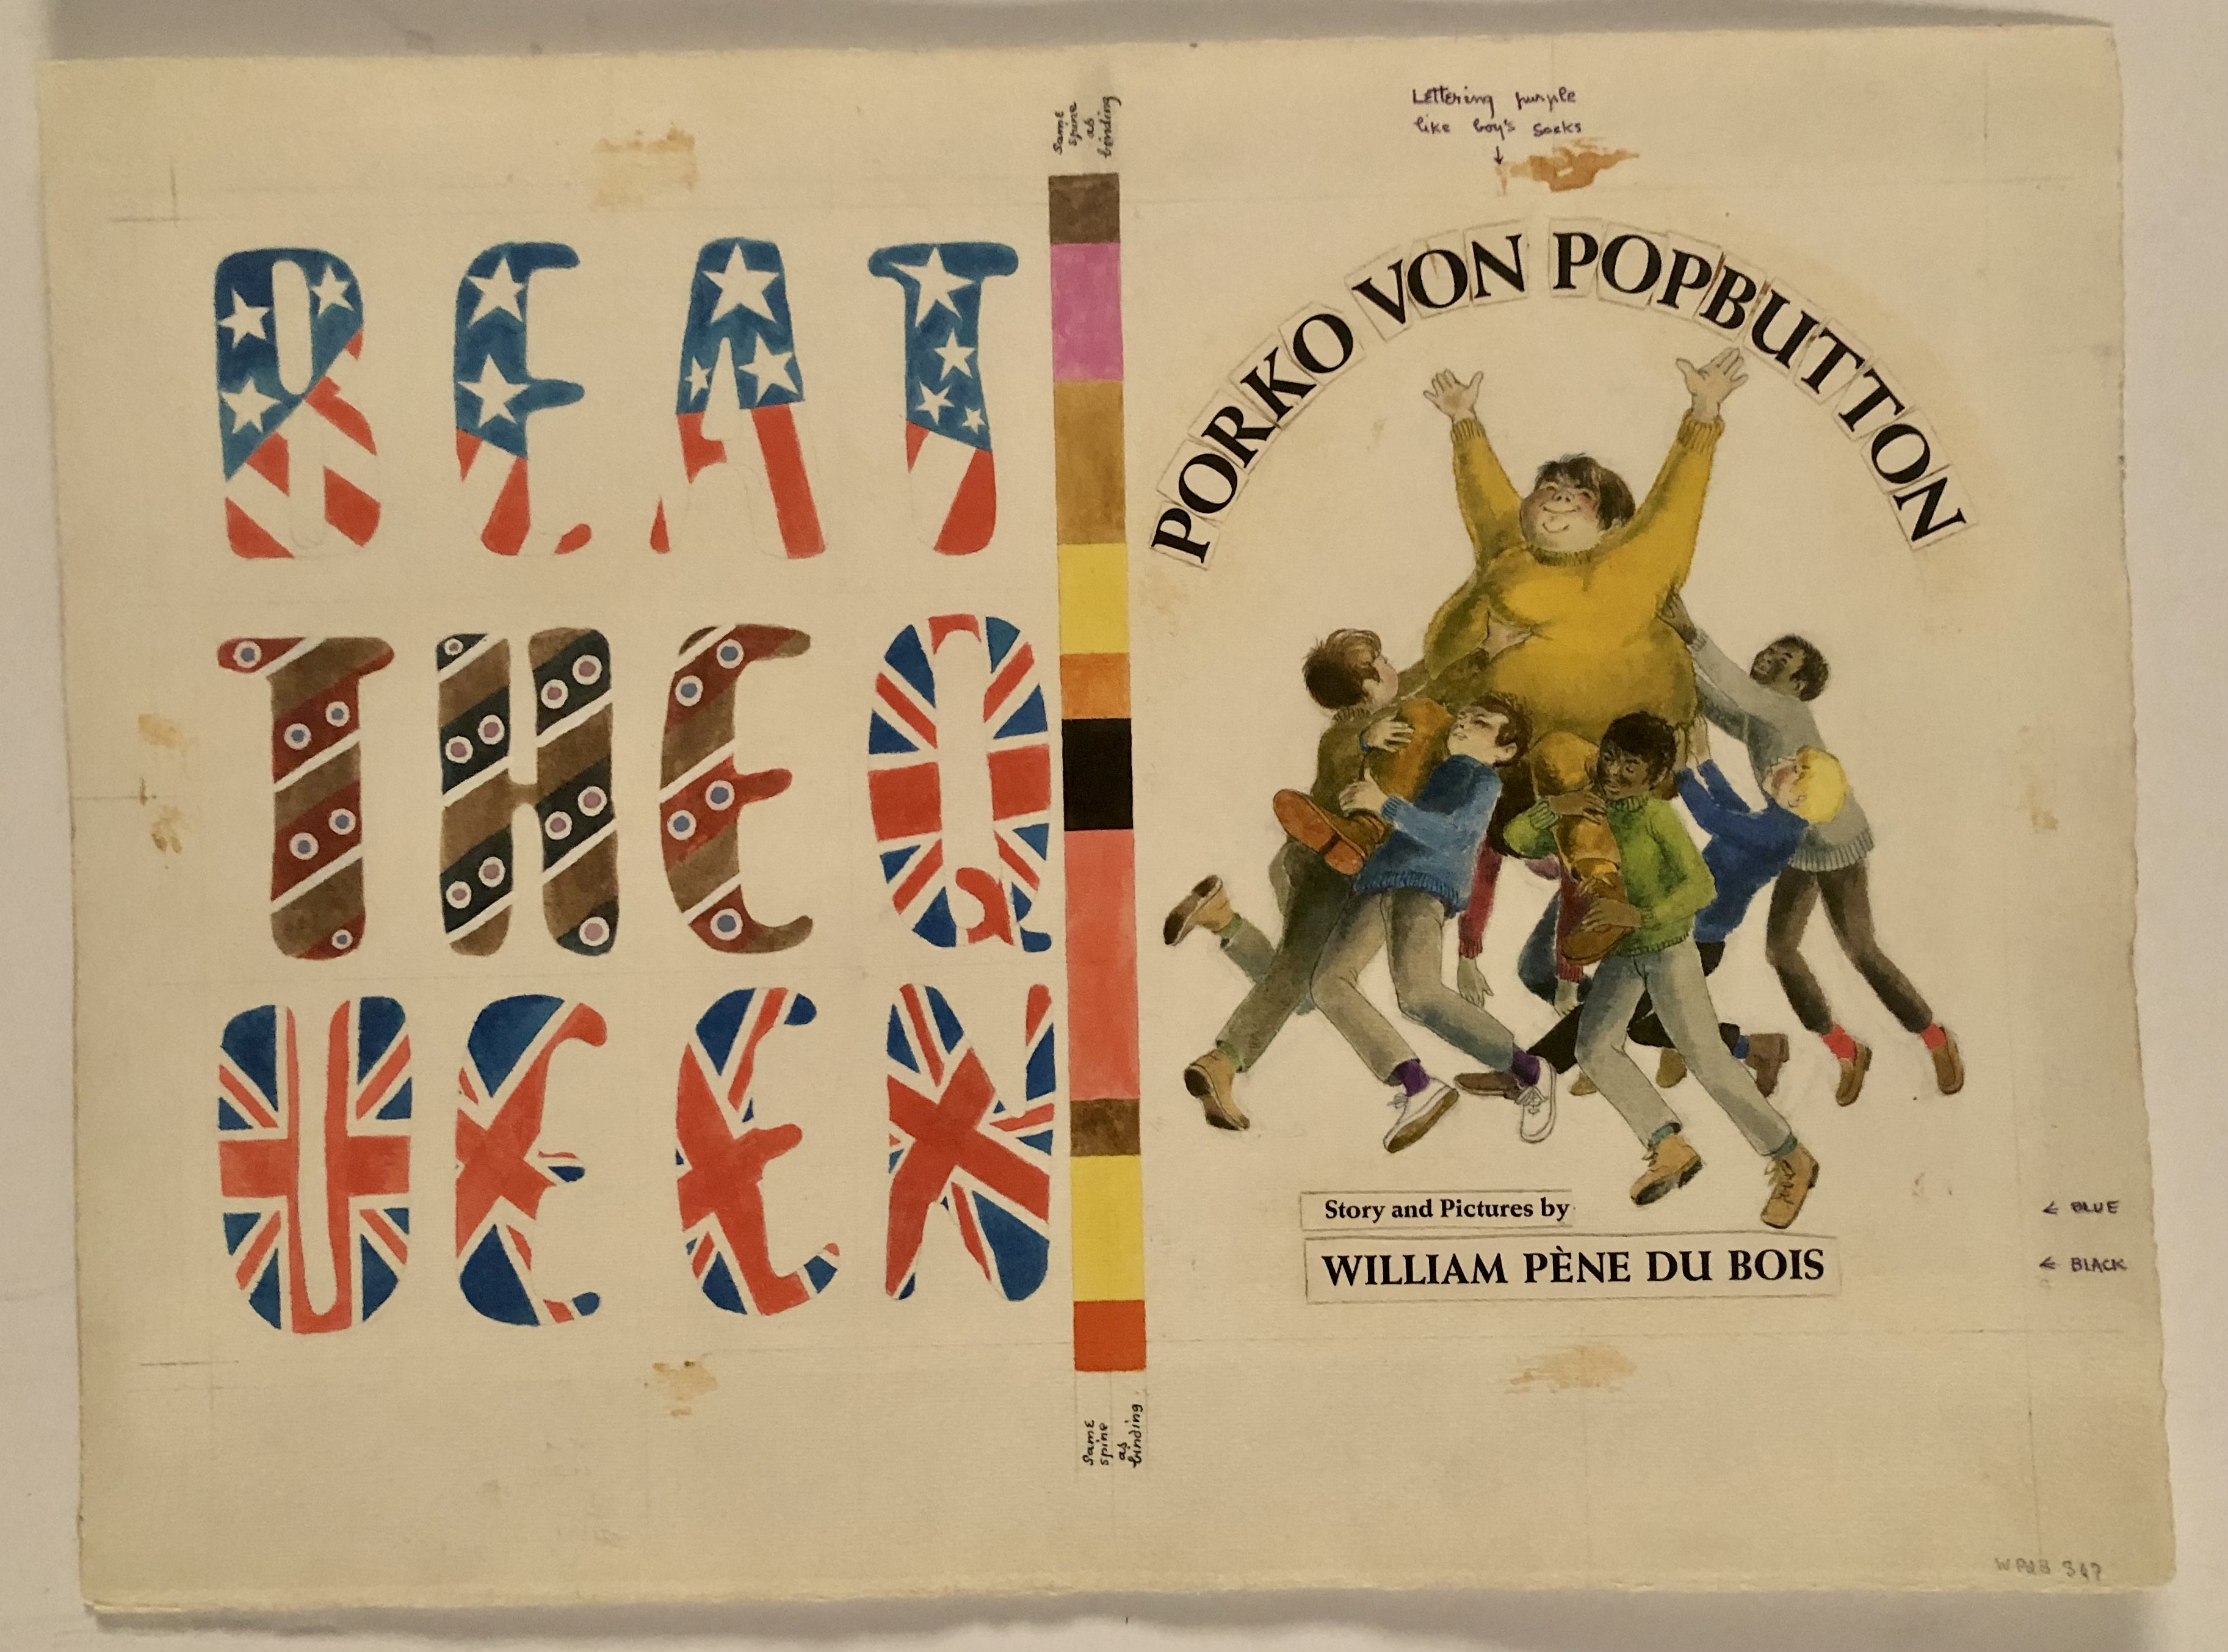 jacket cover with text "Beat the Queen" and team celebrating Porko